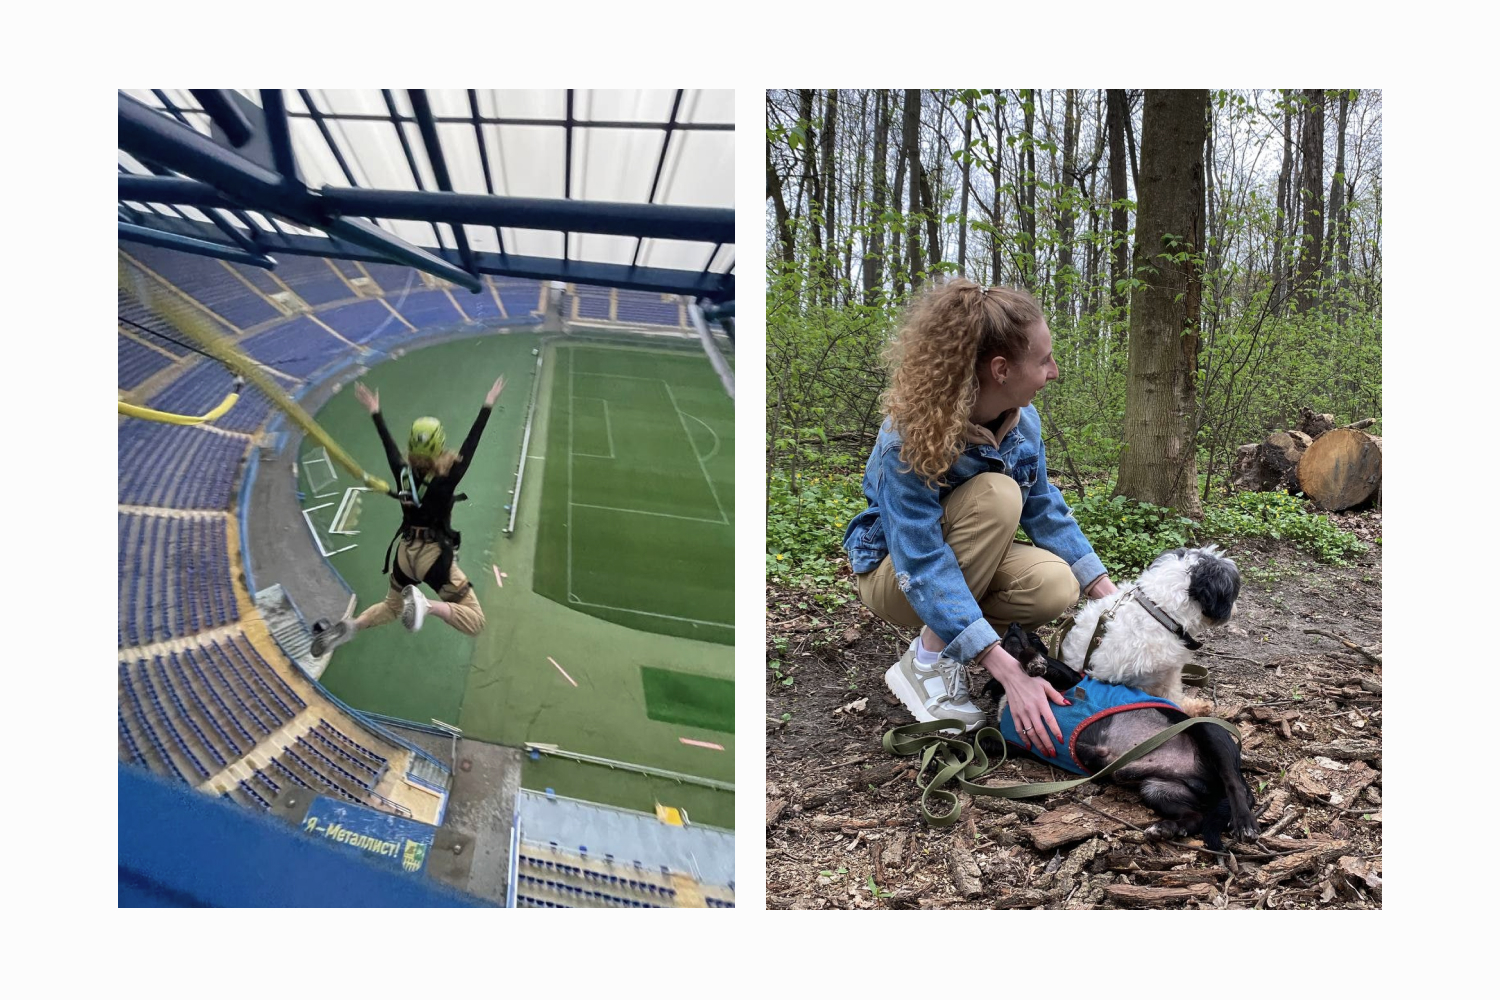 Photos of Valeria Vodyashina in a jump and with a dog in the forest.